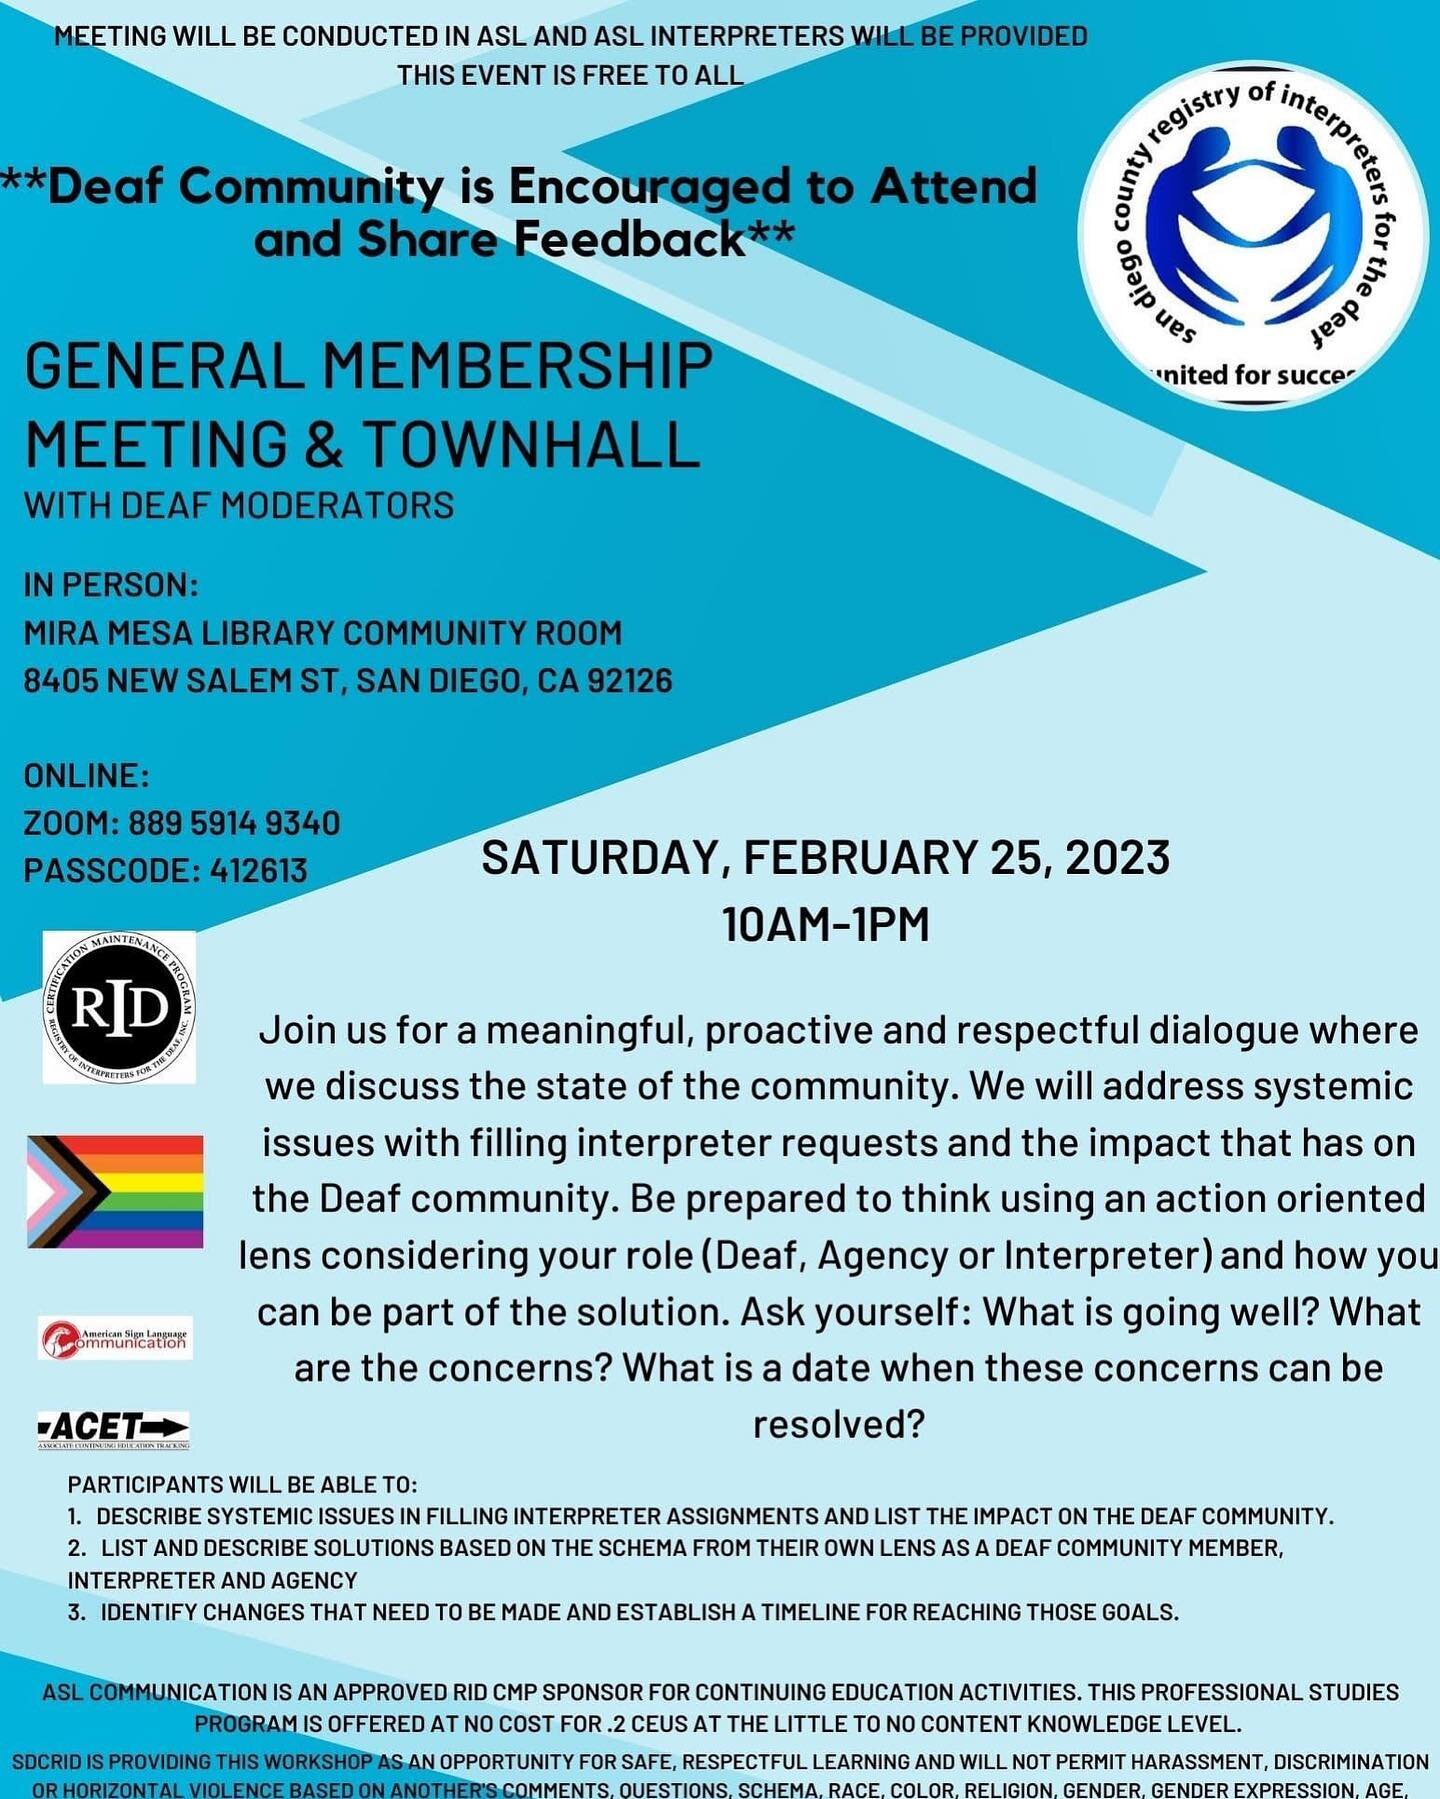 UPDATE! UPDATE! 

SDCRID will be offering CEU's for the Town hall! This is a free event to the community. We hope to see you there. 

Flyer ID: Different shades of blue background with SDCRID logo in the right hand corner. Text: MEETING WILL BE CONDU